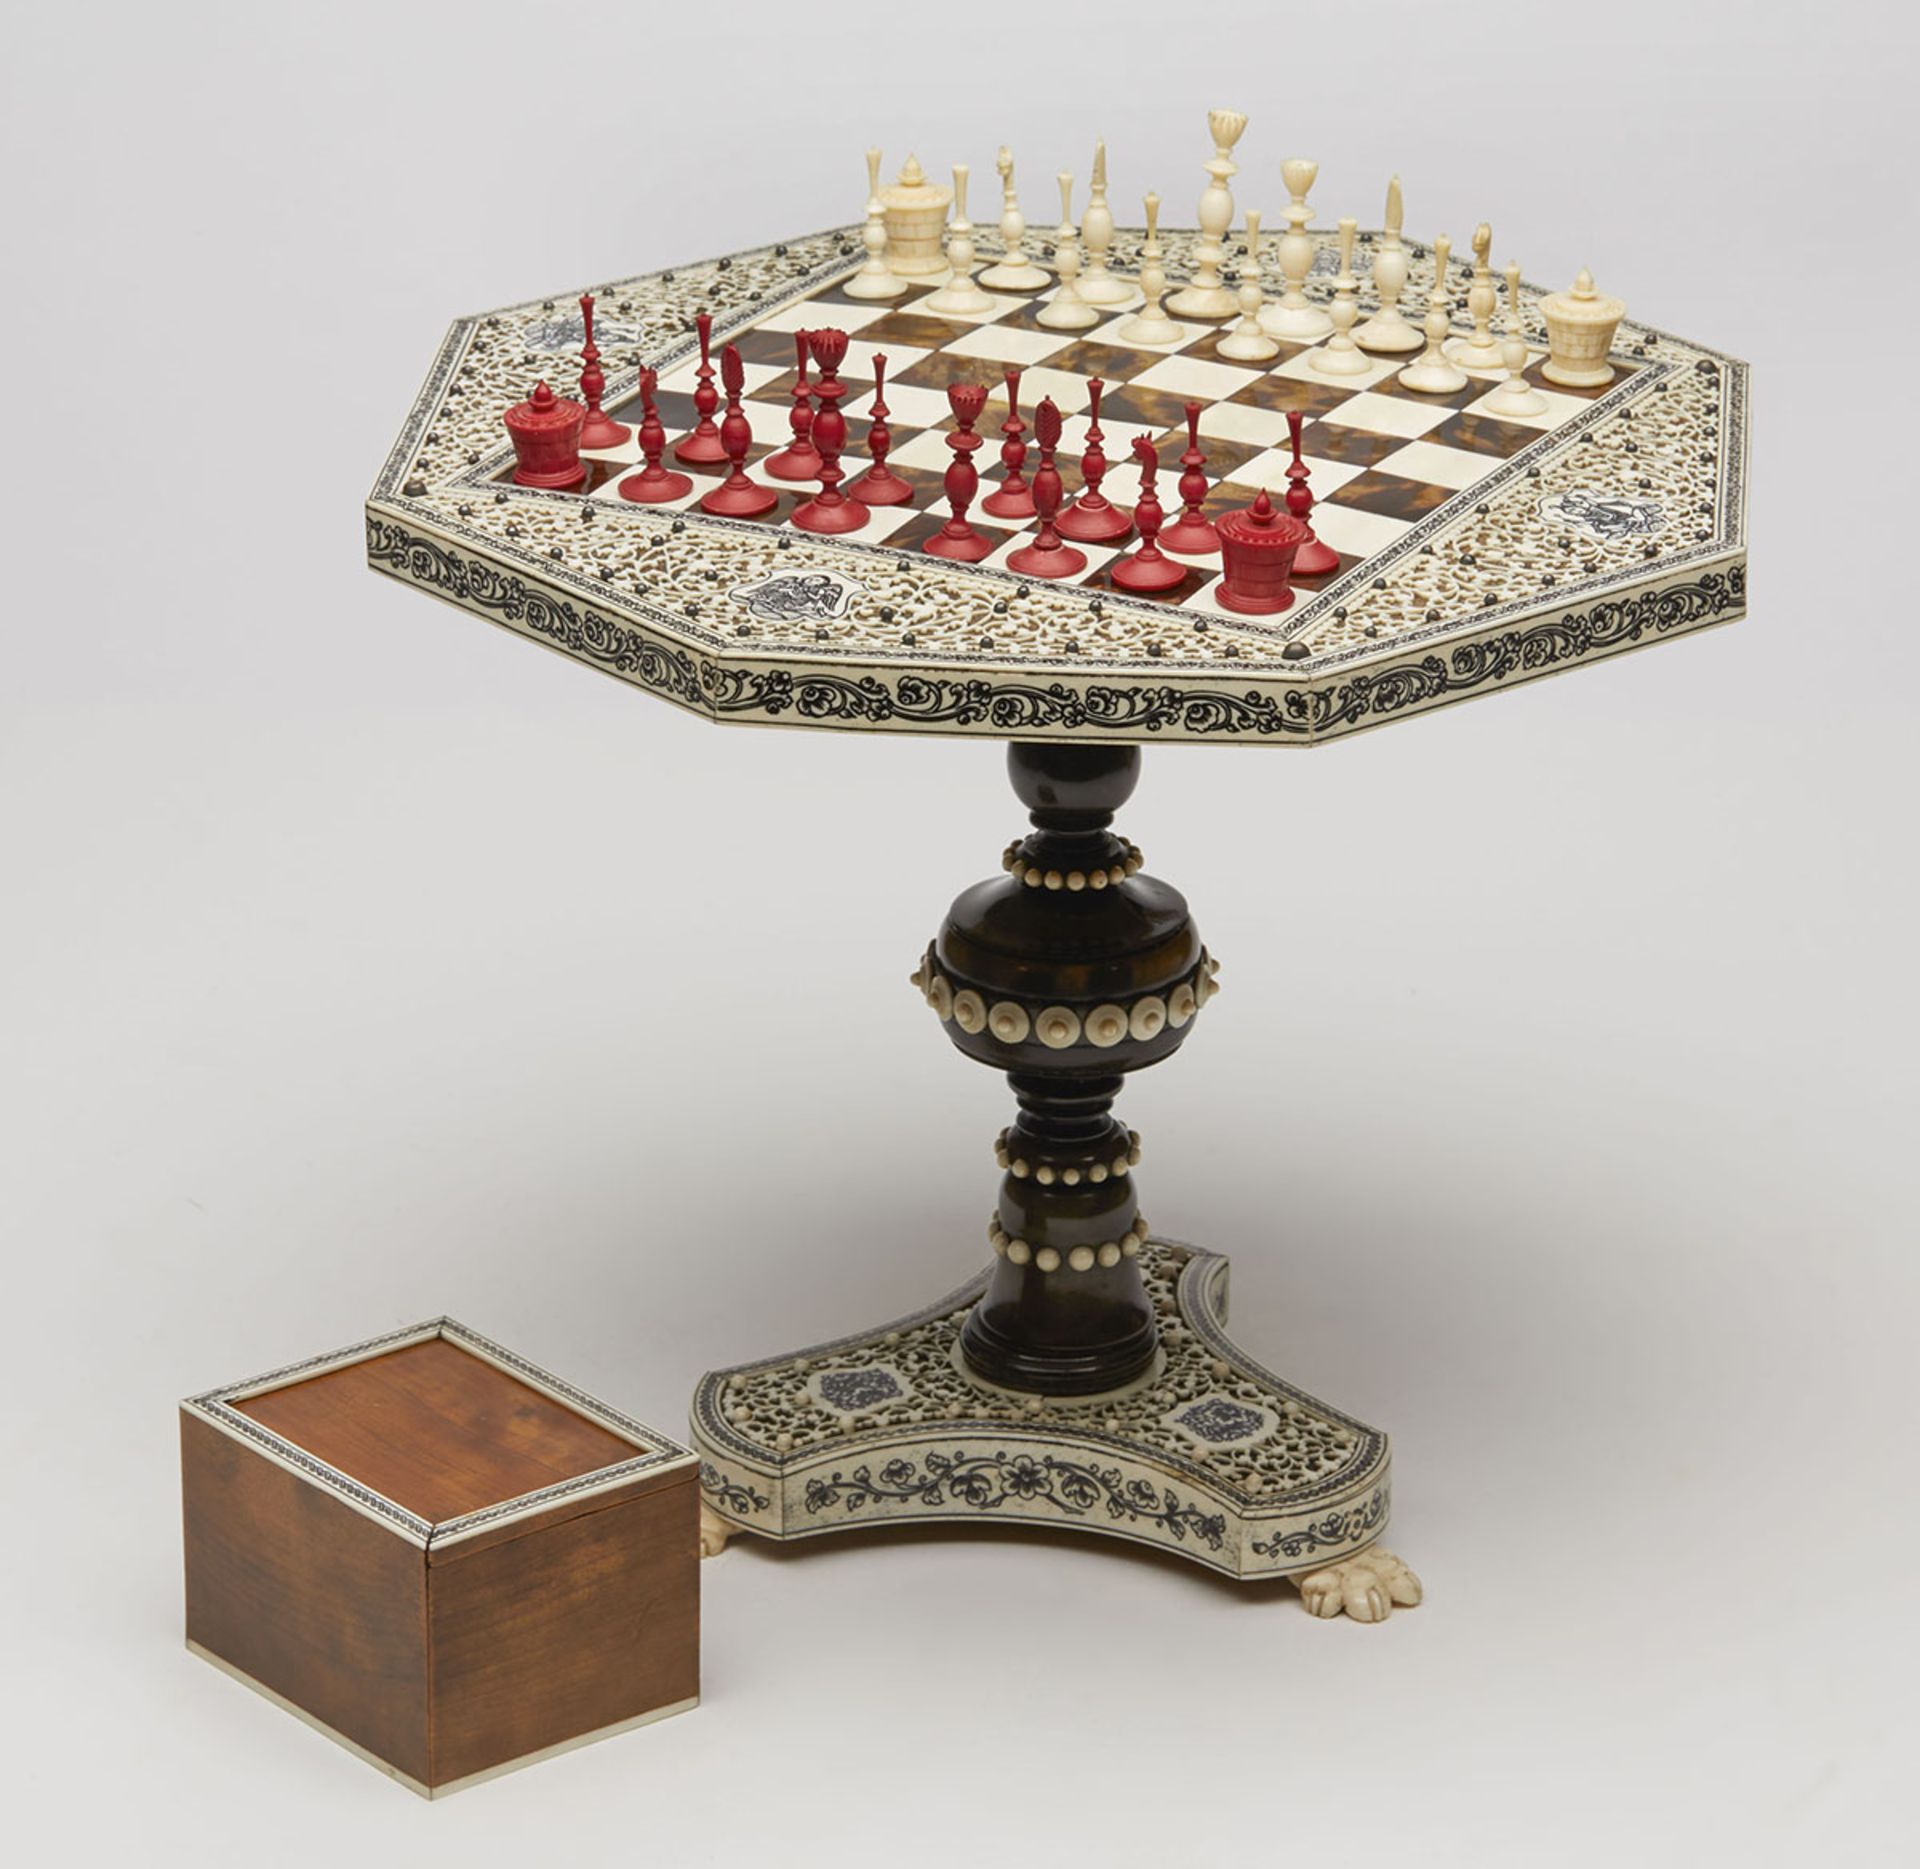 Exceptional & Rare Anglo-Indian Miniature Games Table 19 C. - Image 14 of 15